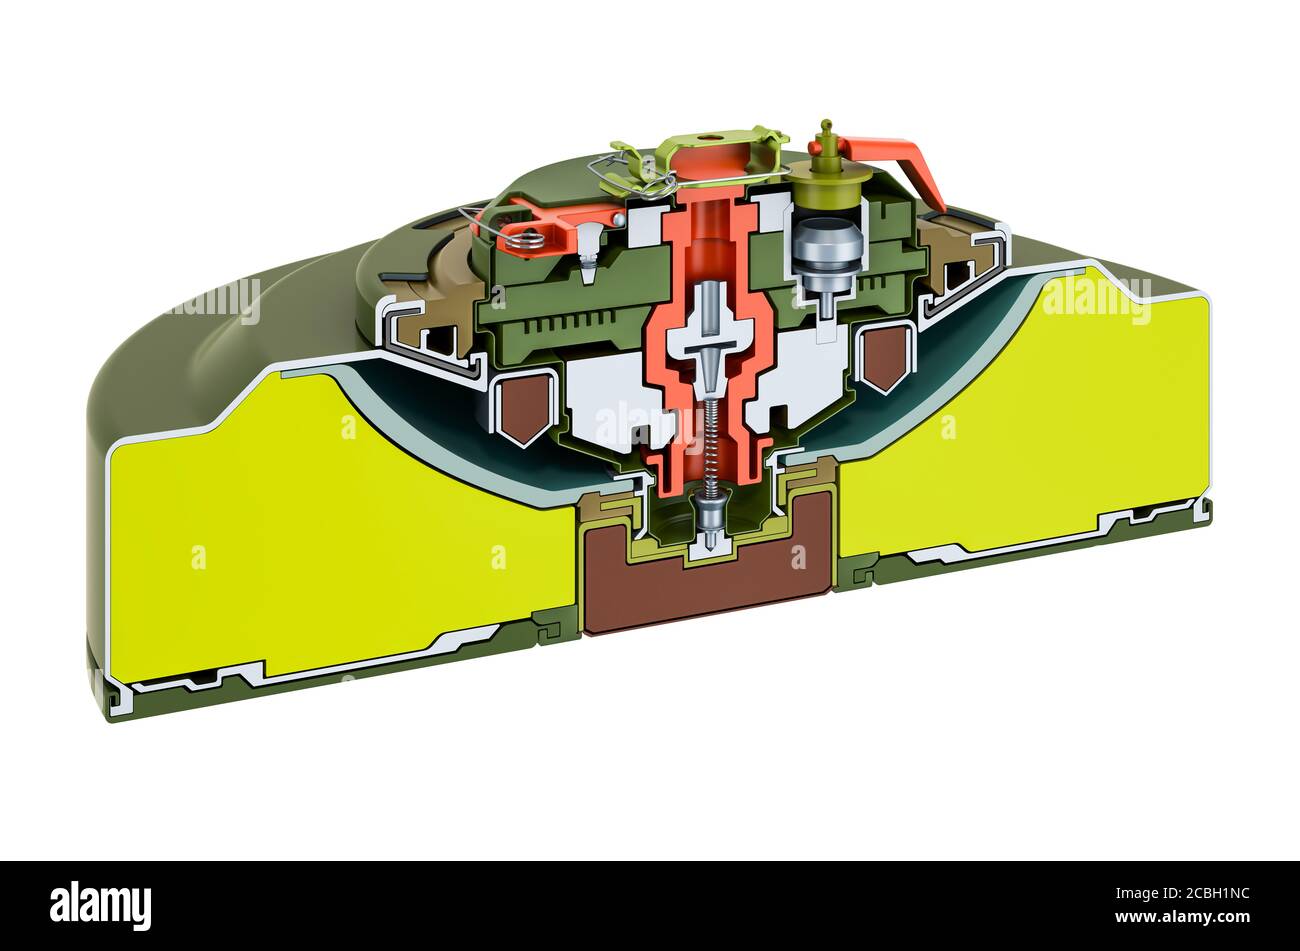 Cross-section of anti-tank mine, 3D rendering isolated on white background Stock Photo